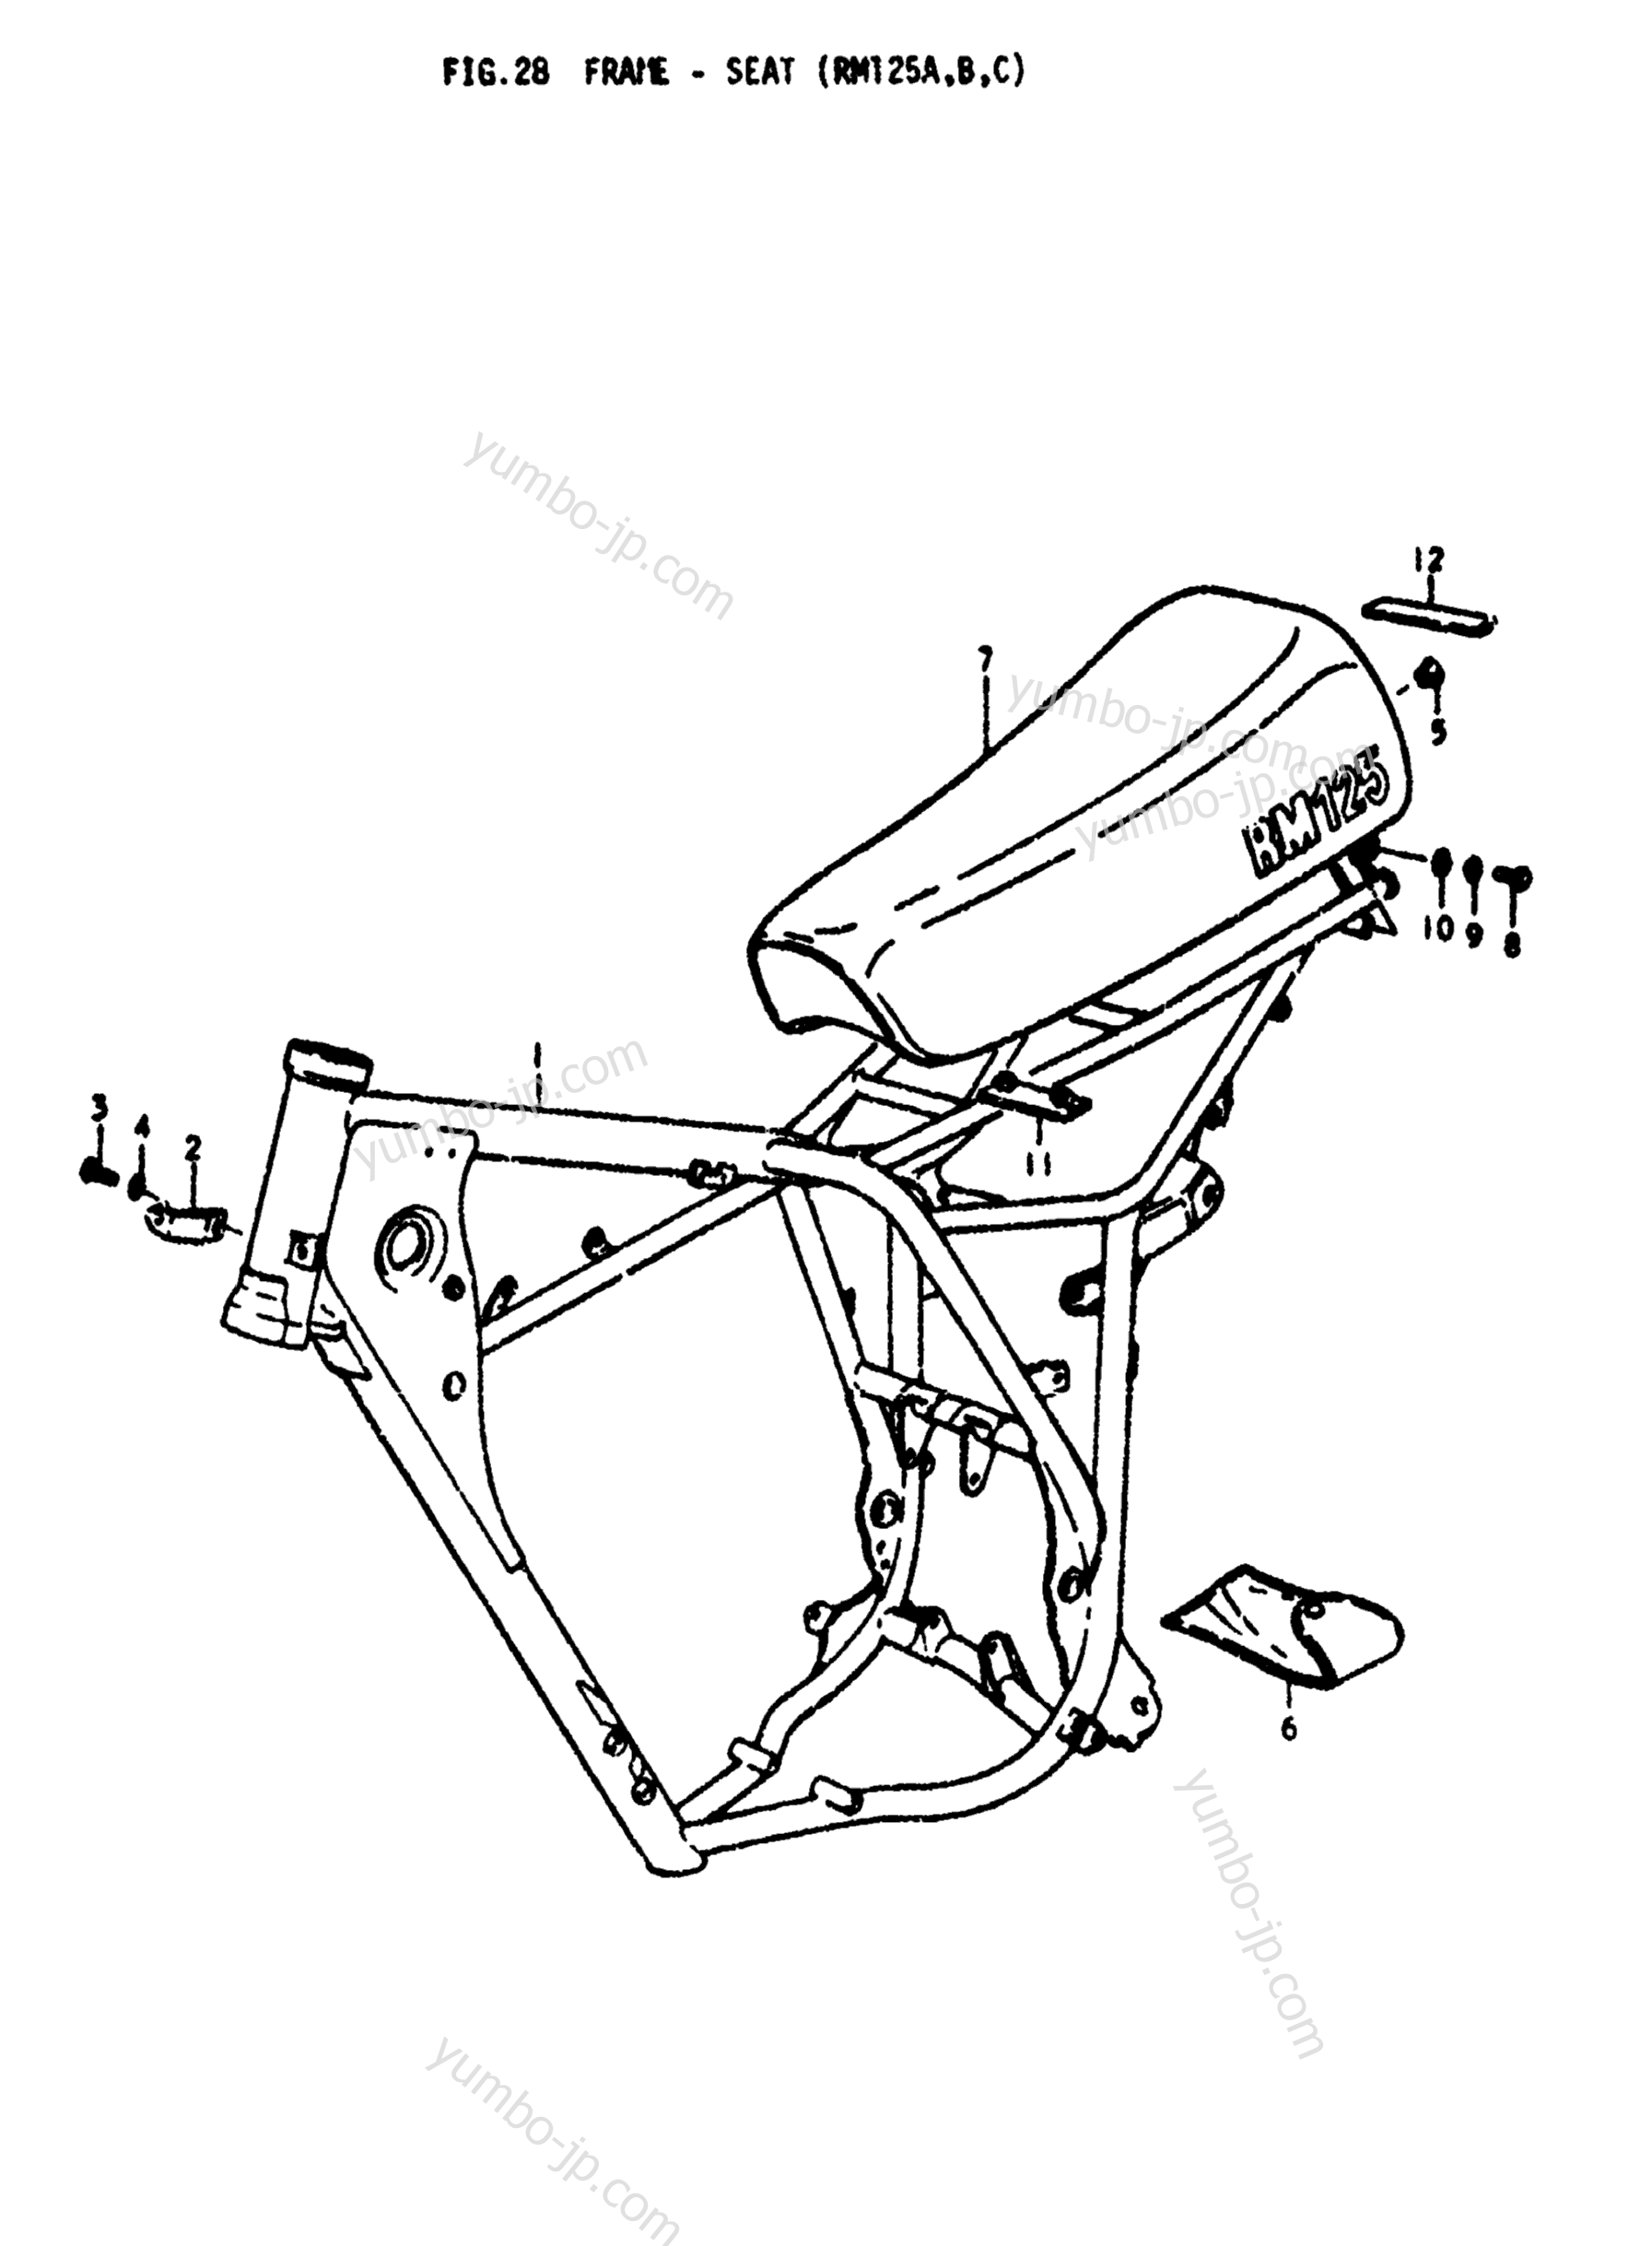 FRAME - SEAT (RM125A for motorcycles SUZUKI RM125 1977 year